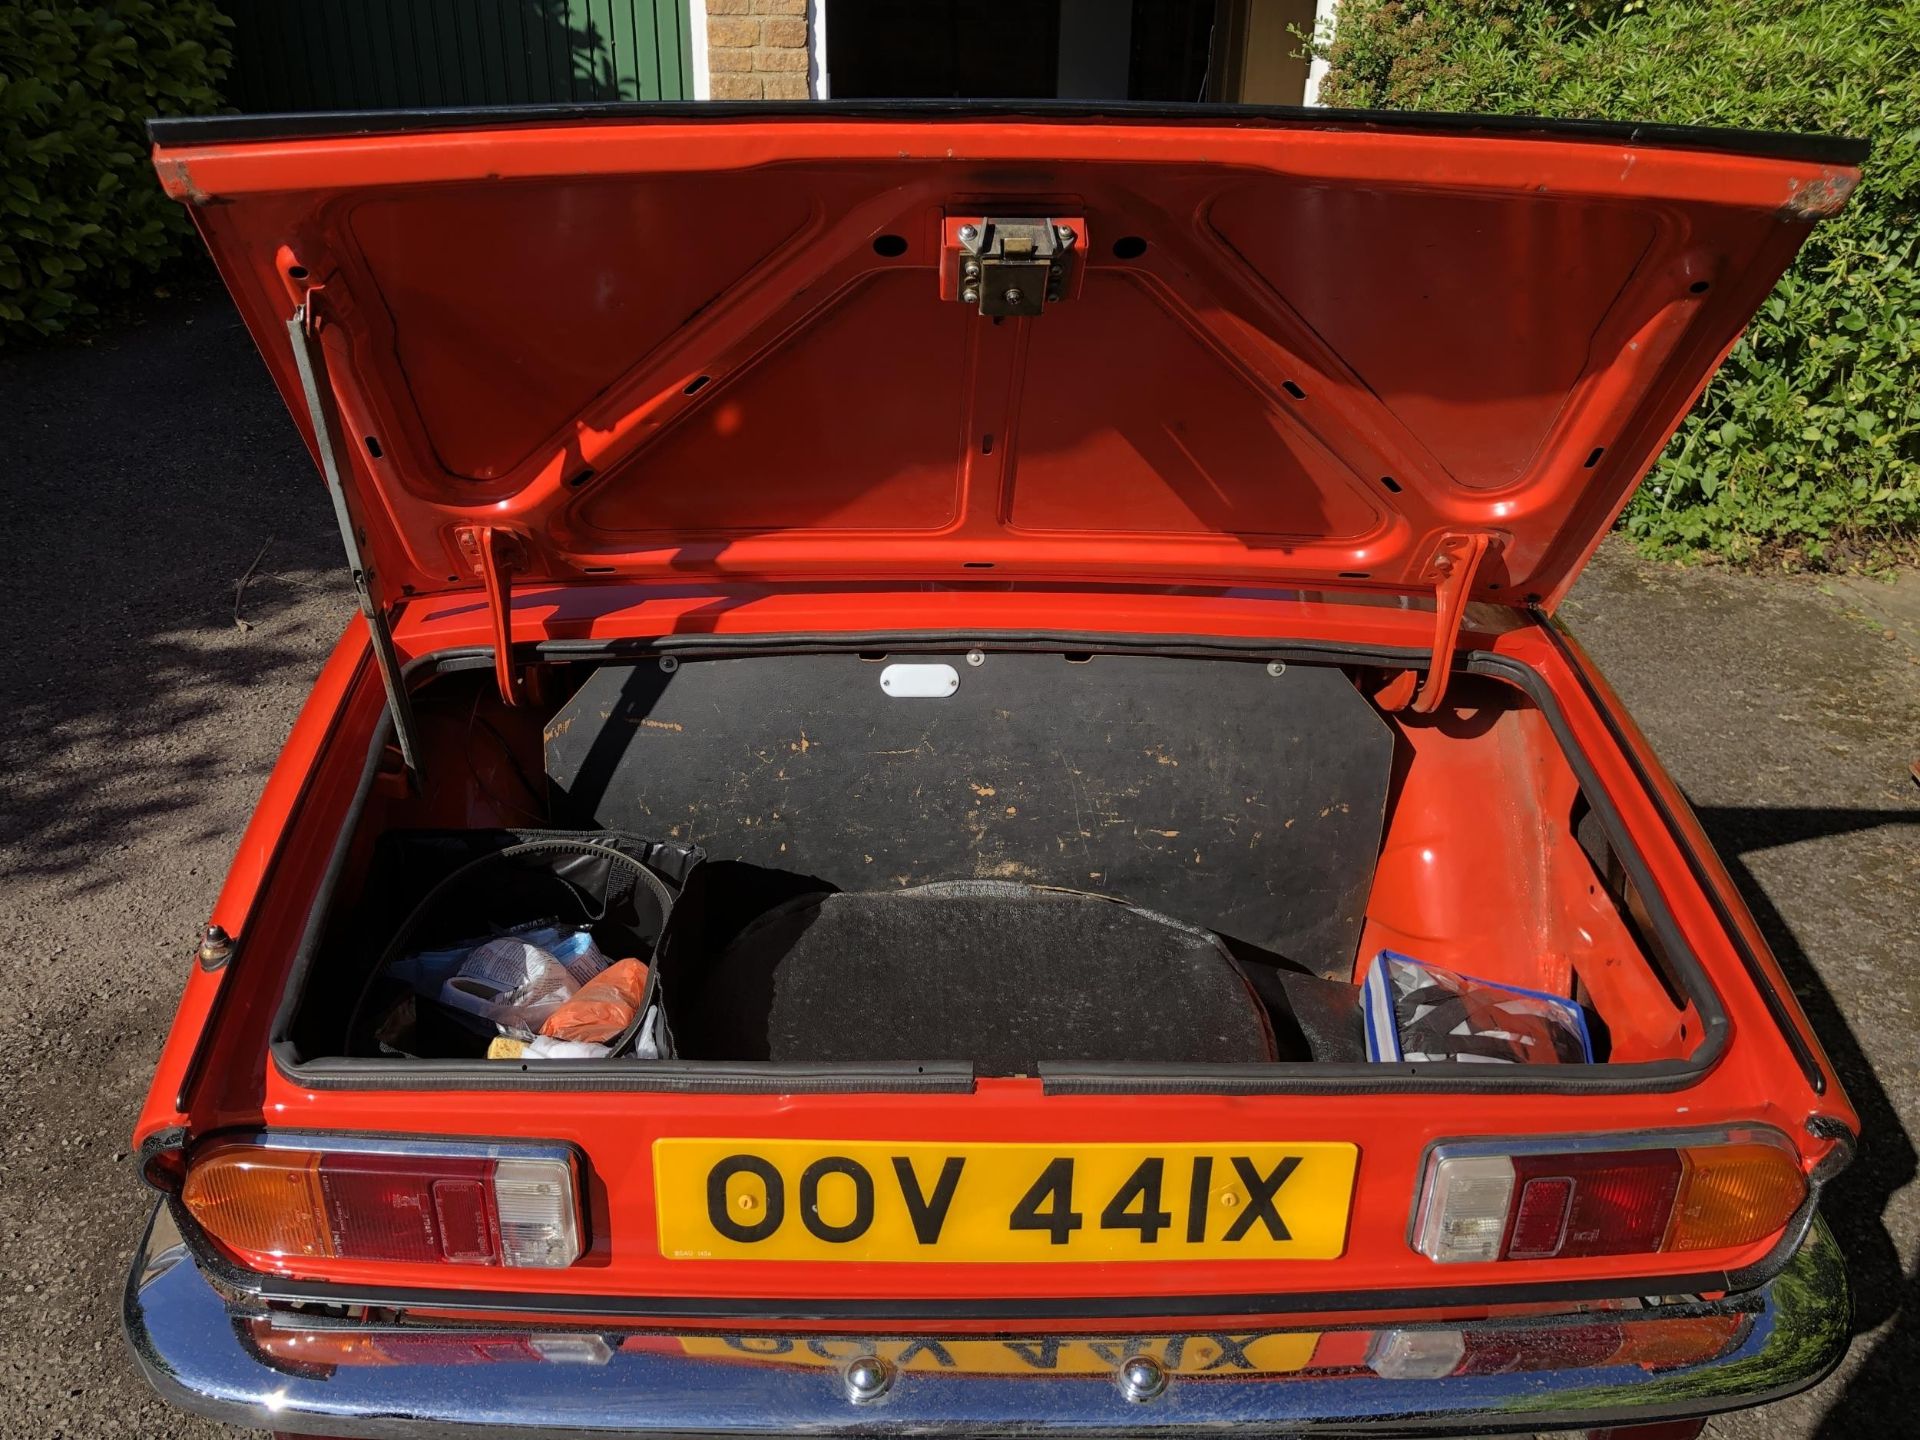 1981 Triumph Spitfire 1500 Registration number OOV 441X Chassis number TFADW1AT009713 Engine - Image 42 of 57